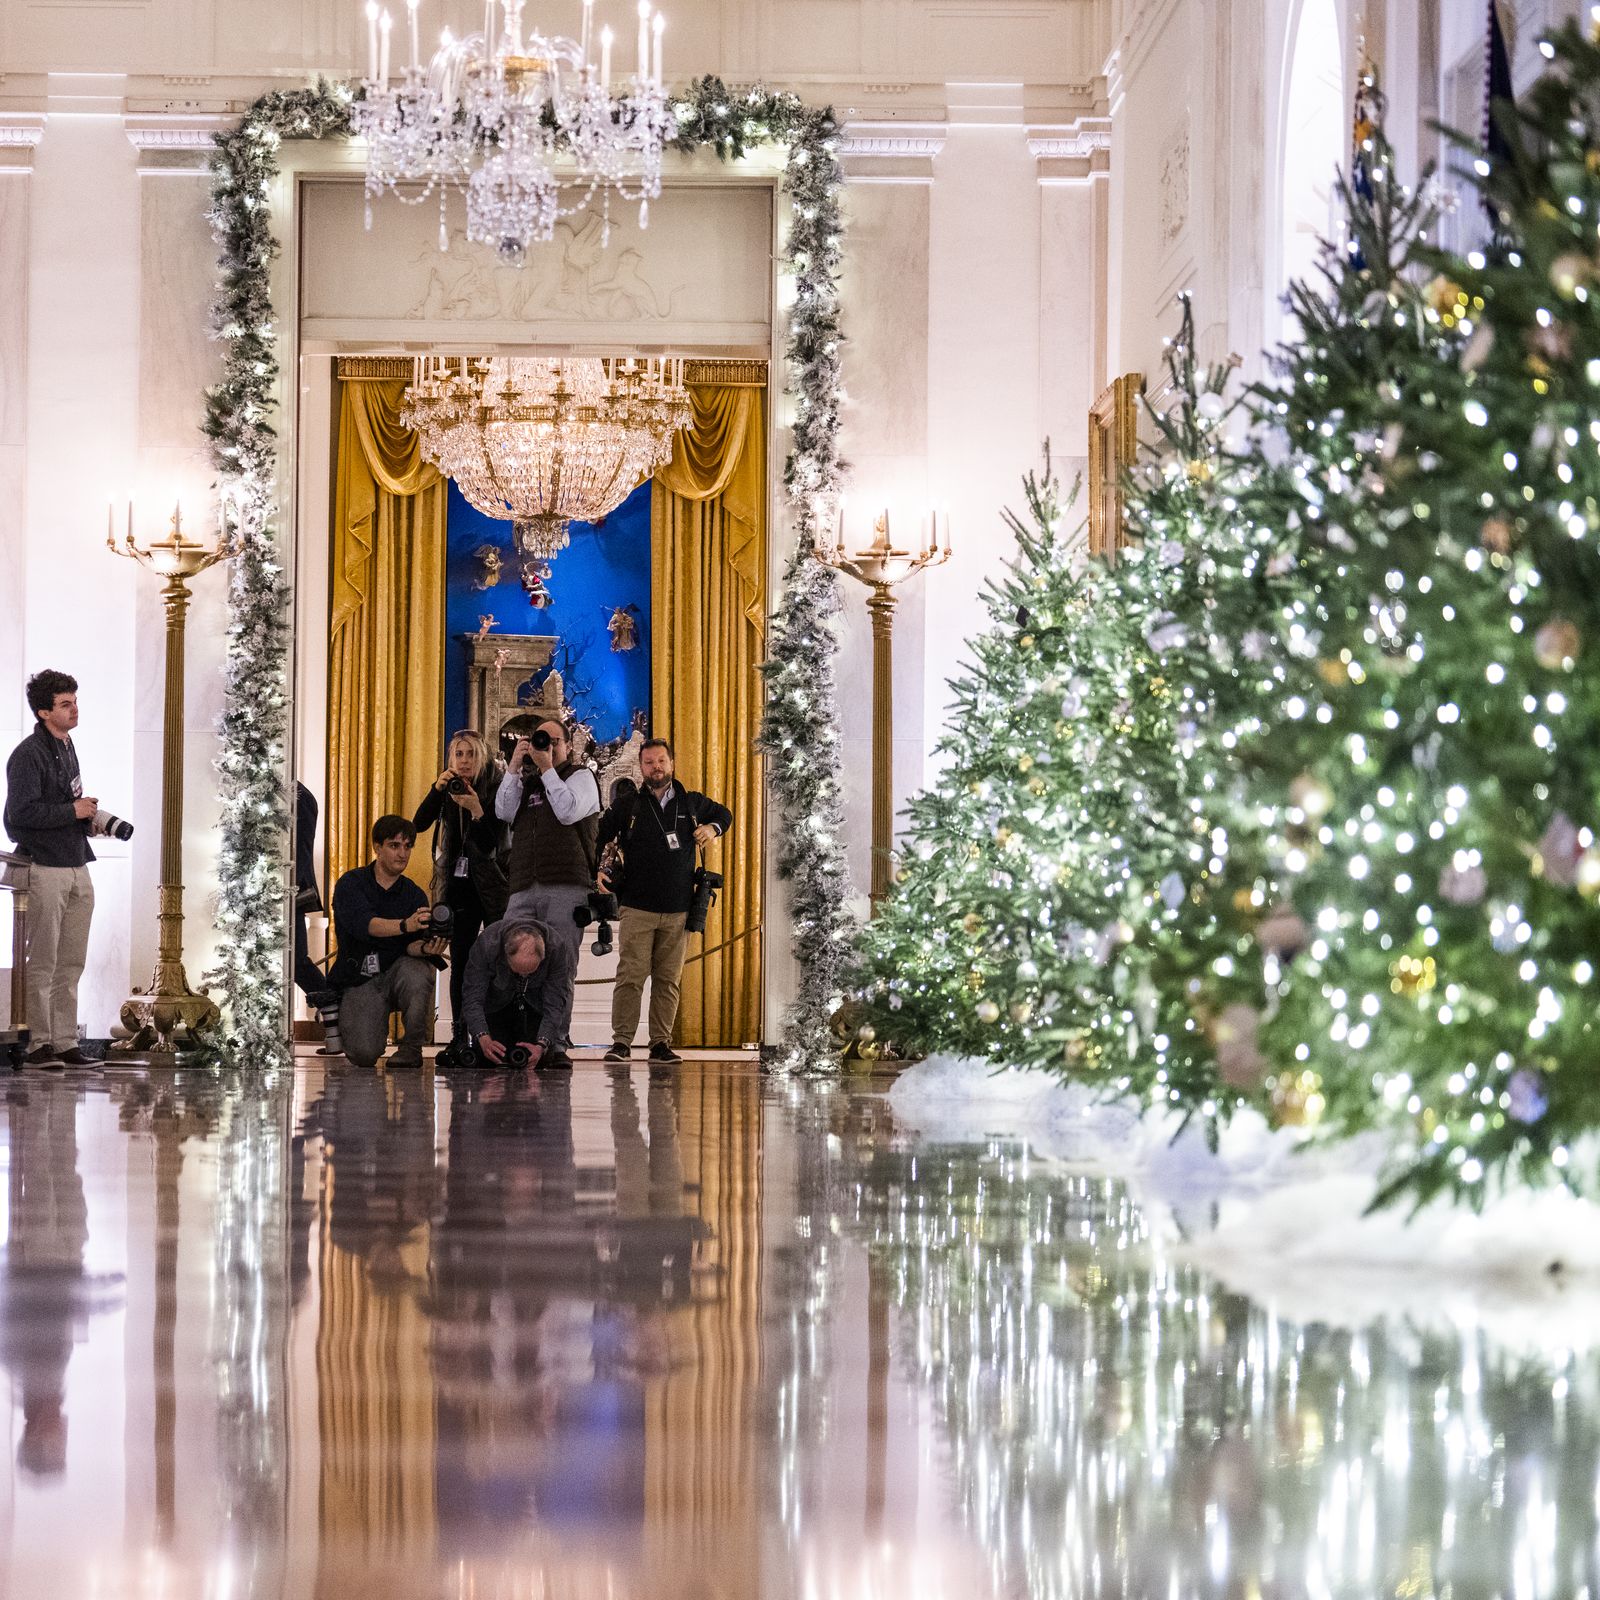 PHOTOS: Check Out the 2022 White House Christmas Decorations